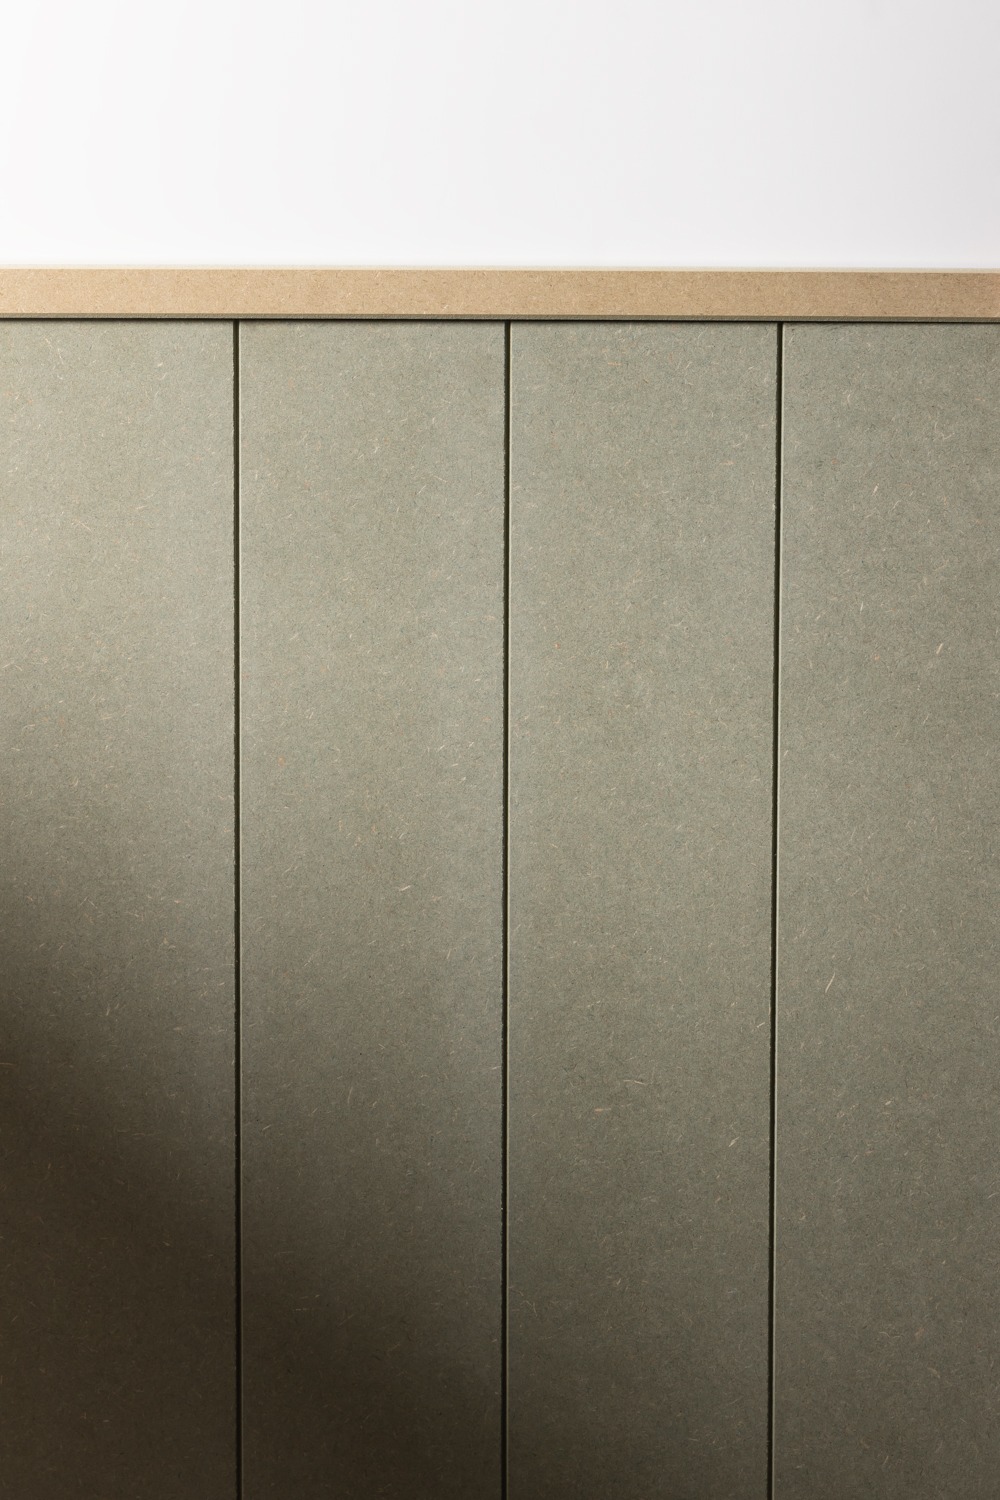 image of a mdf top trim on a wooden wall panel 